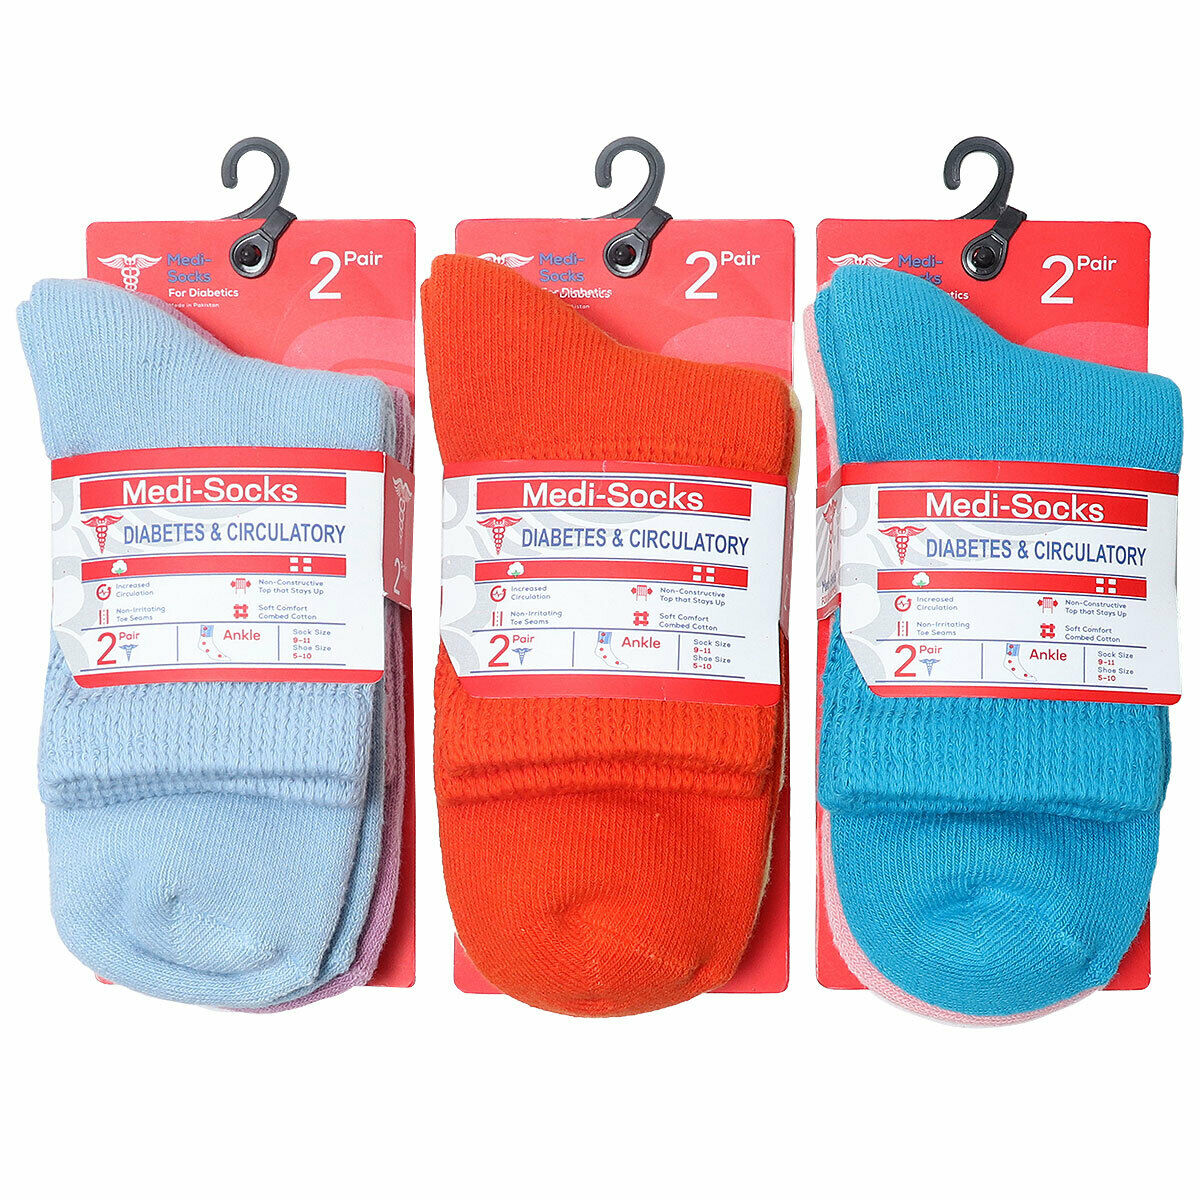 Diamond Star Diabetic Socks Combed Cotton Women's Ankle Socks Health Circulatory Physicians Approved Non Binding Top 6 Pack 9-11 Mixed Color